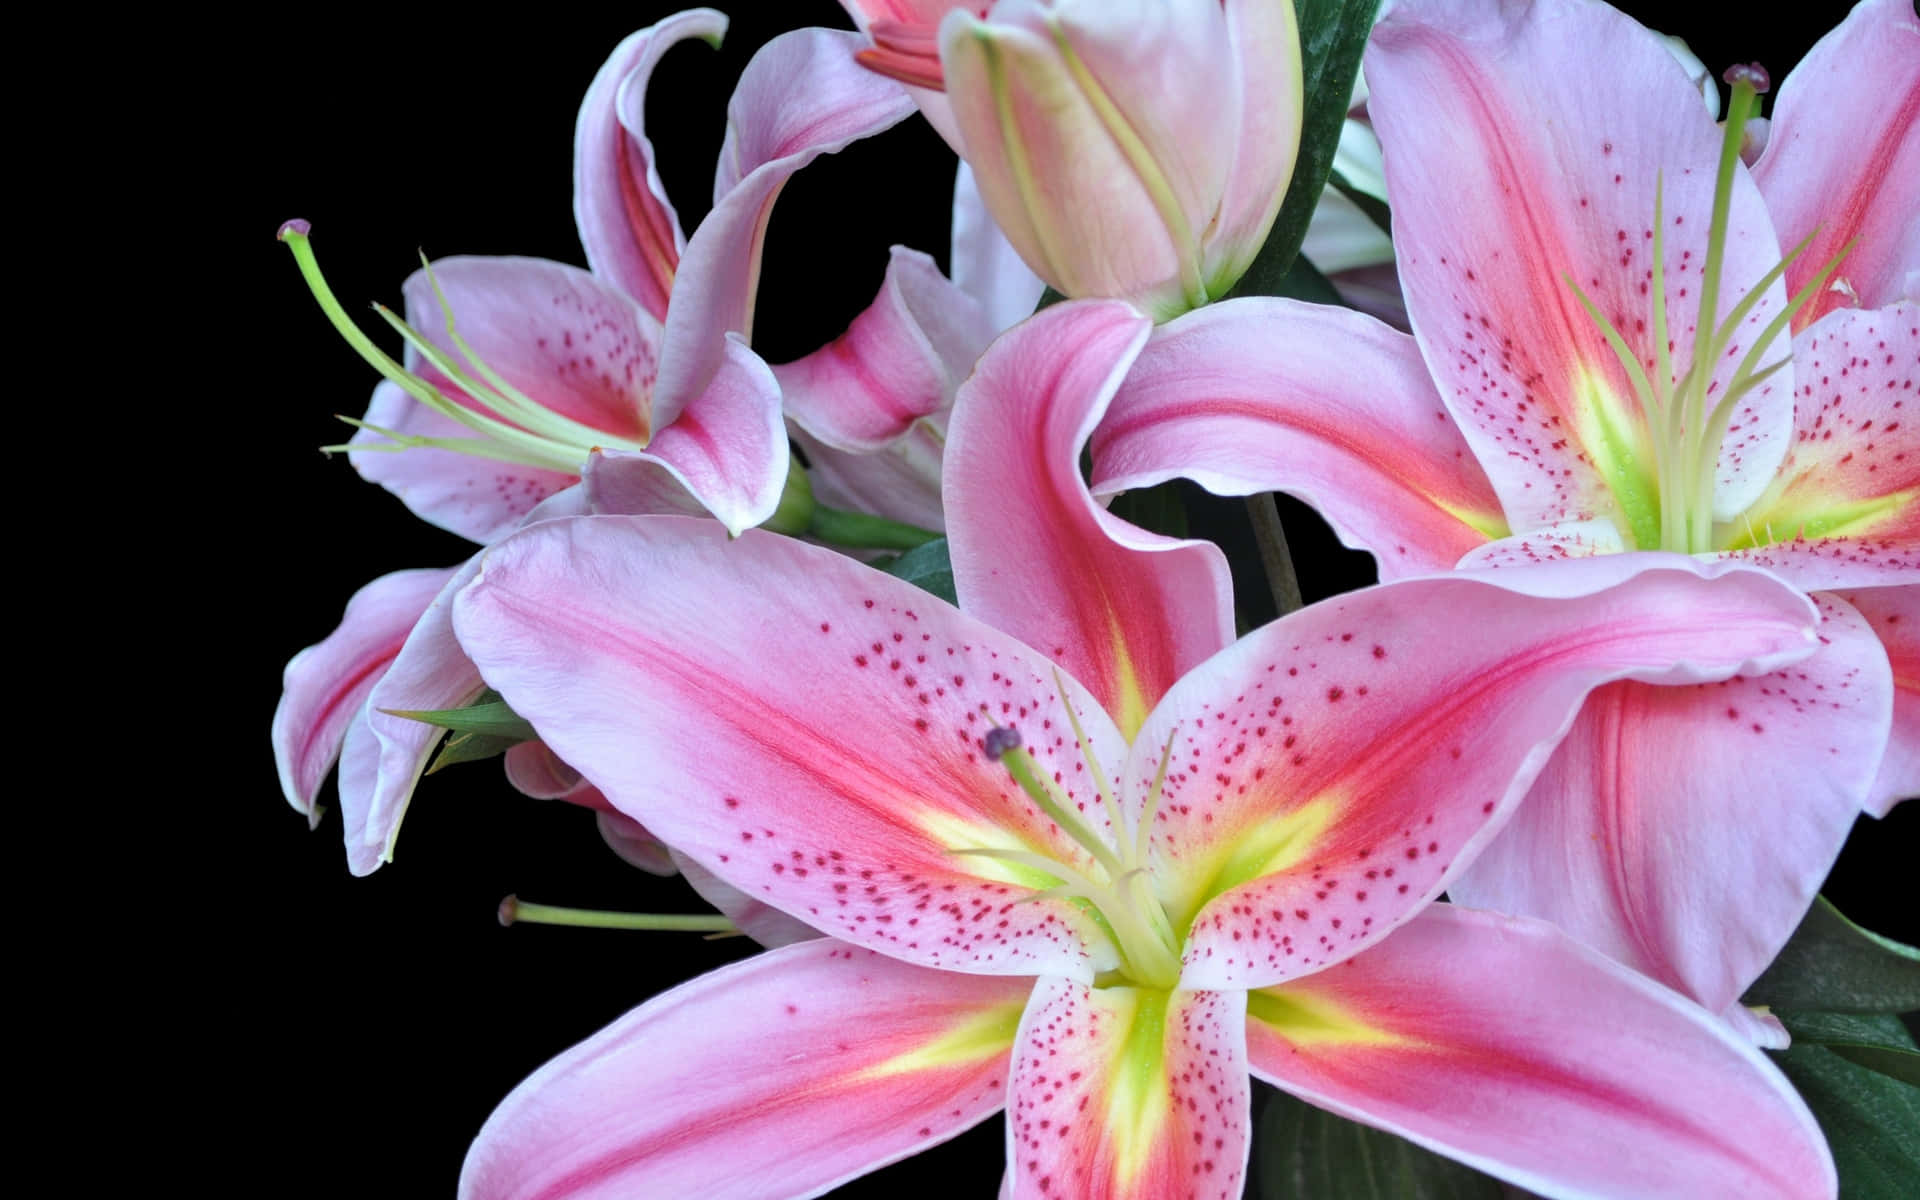 Stunning Lily in Full Bloom